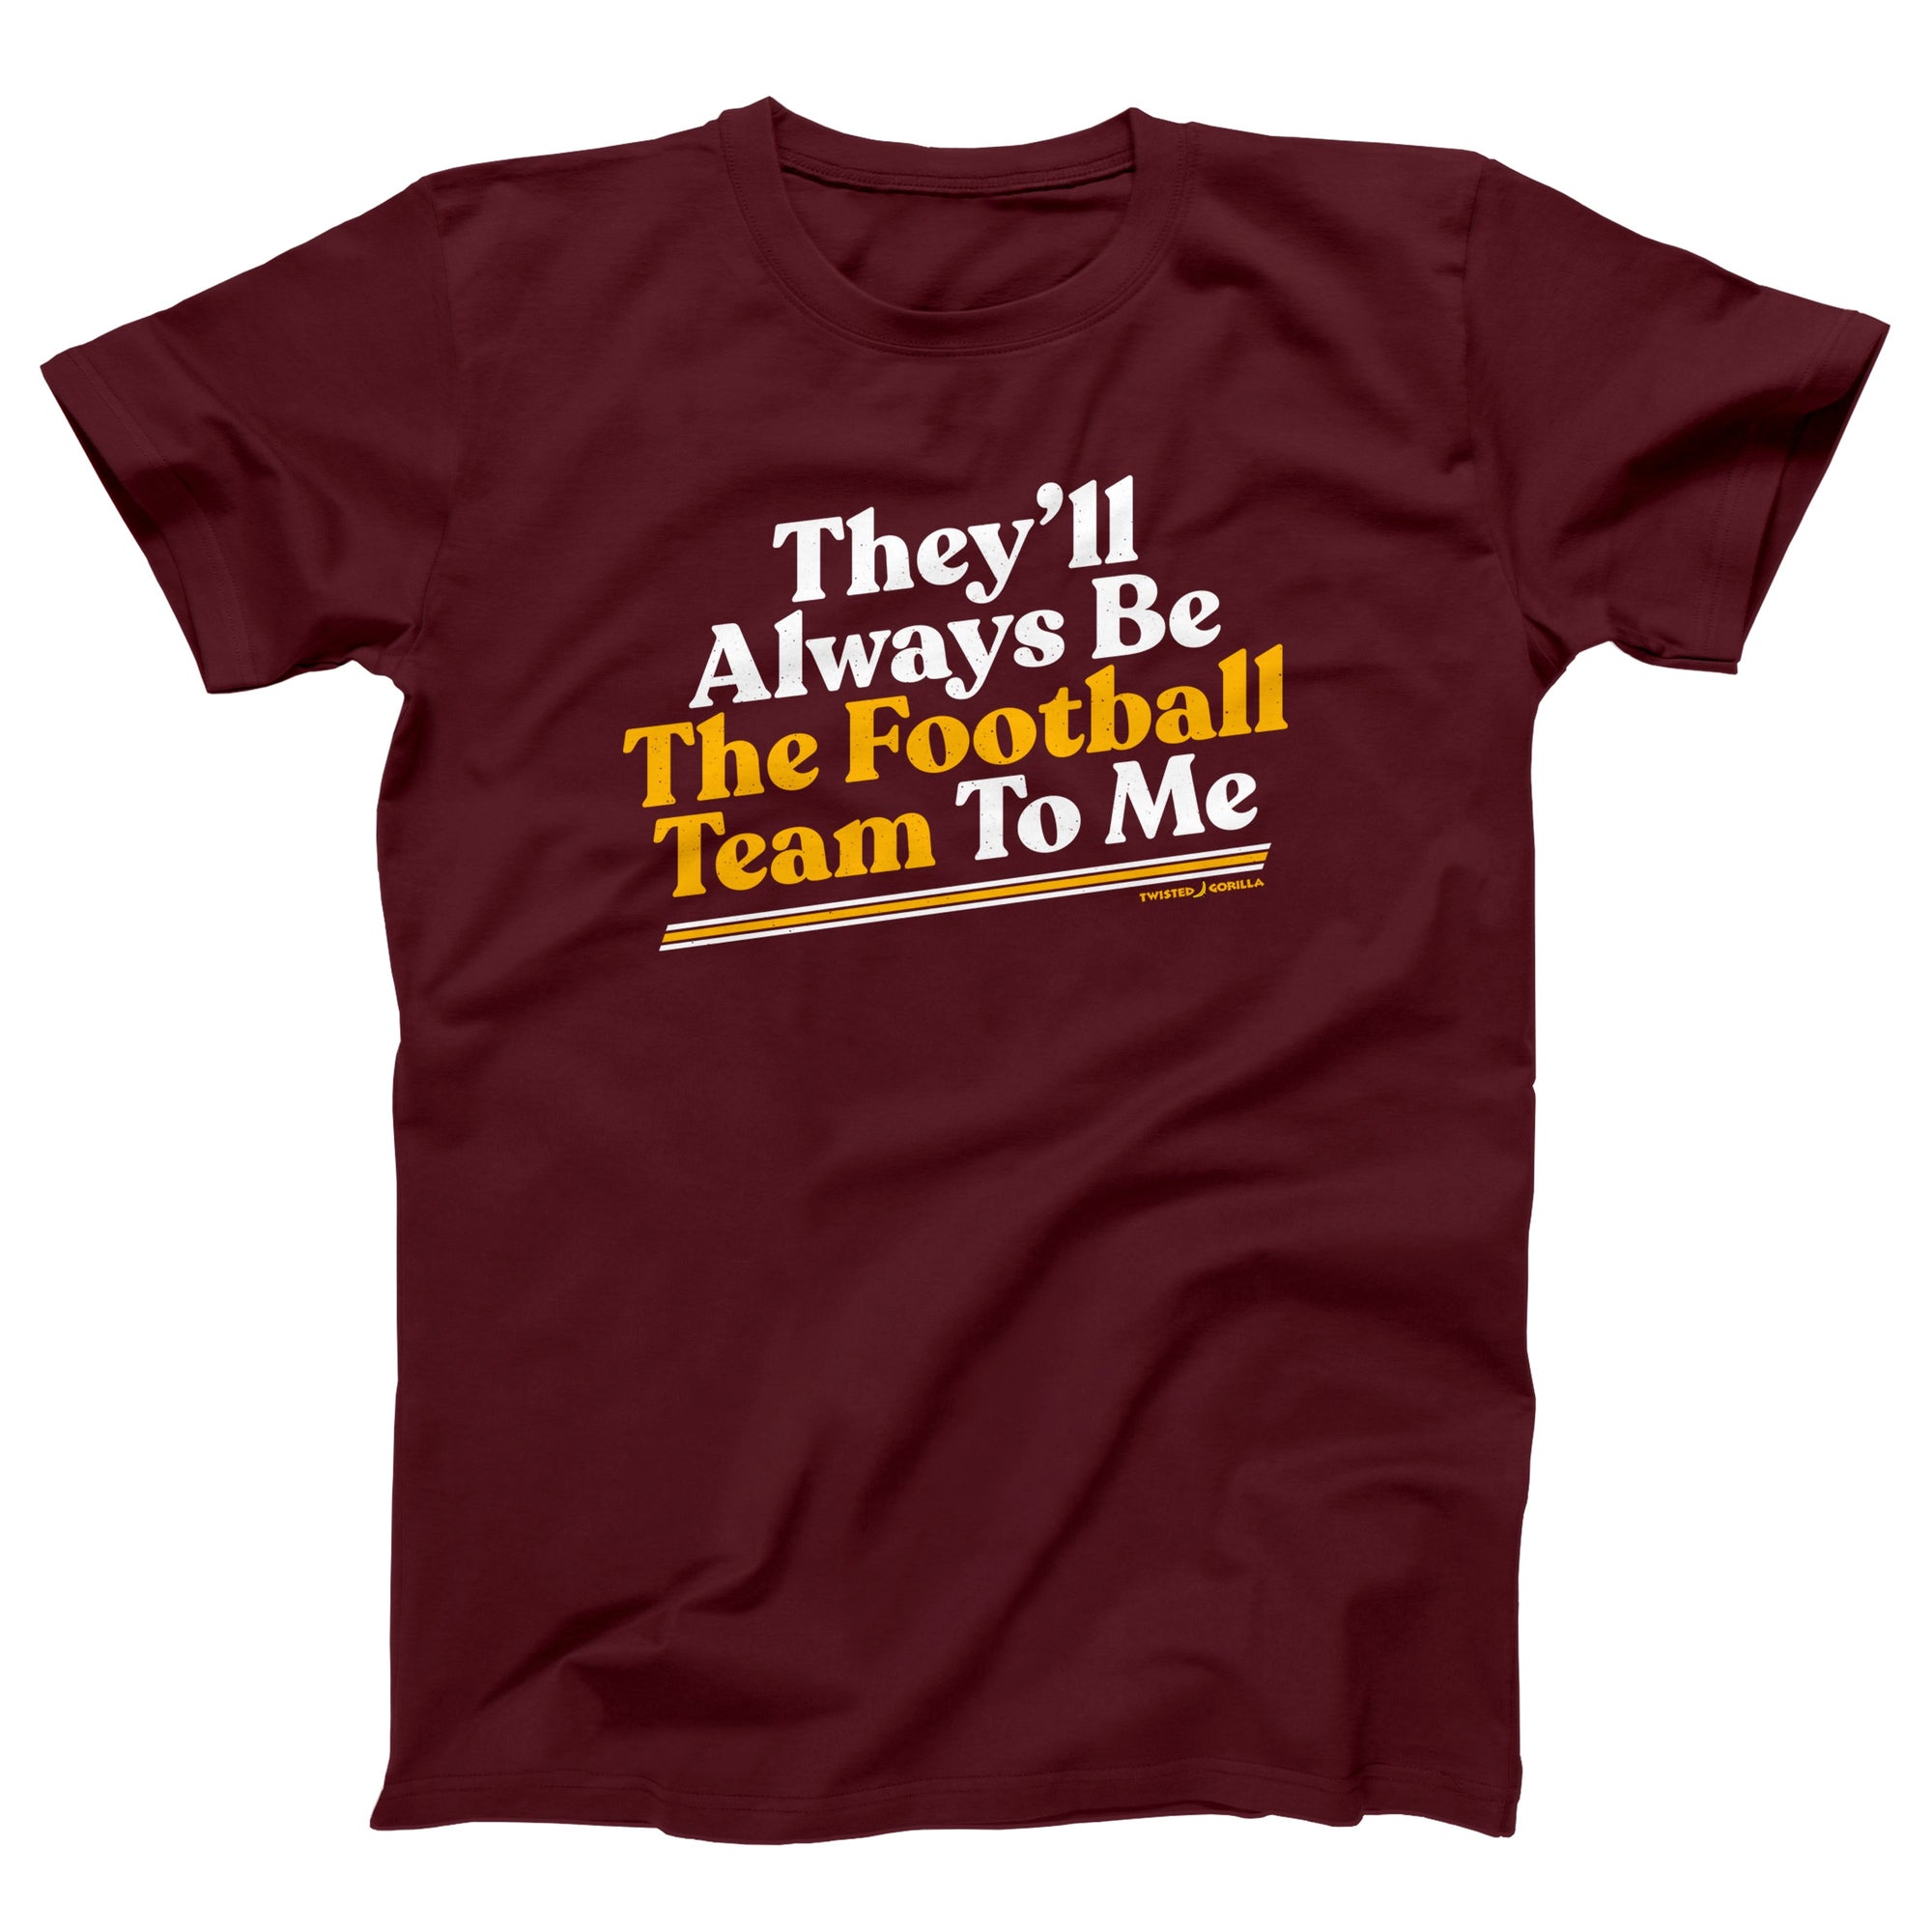 They'll Always Be The Football Team To Me Adult Unisex T-Shirt - anishphilip